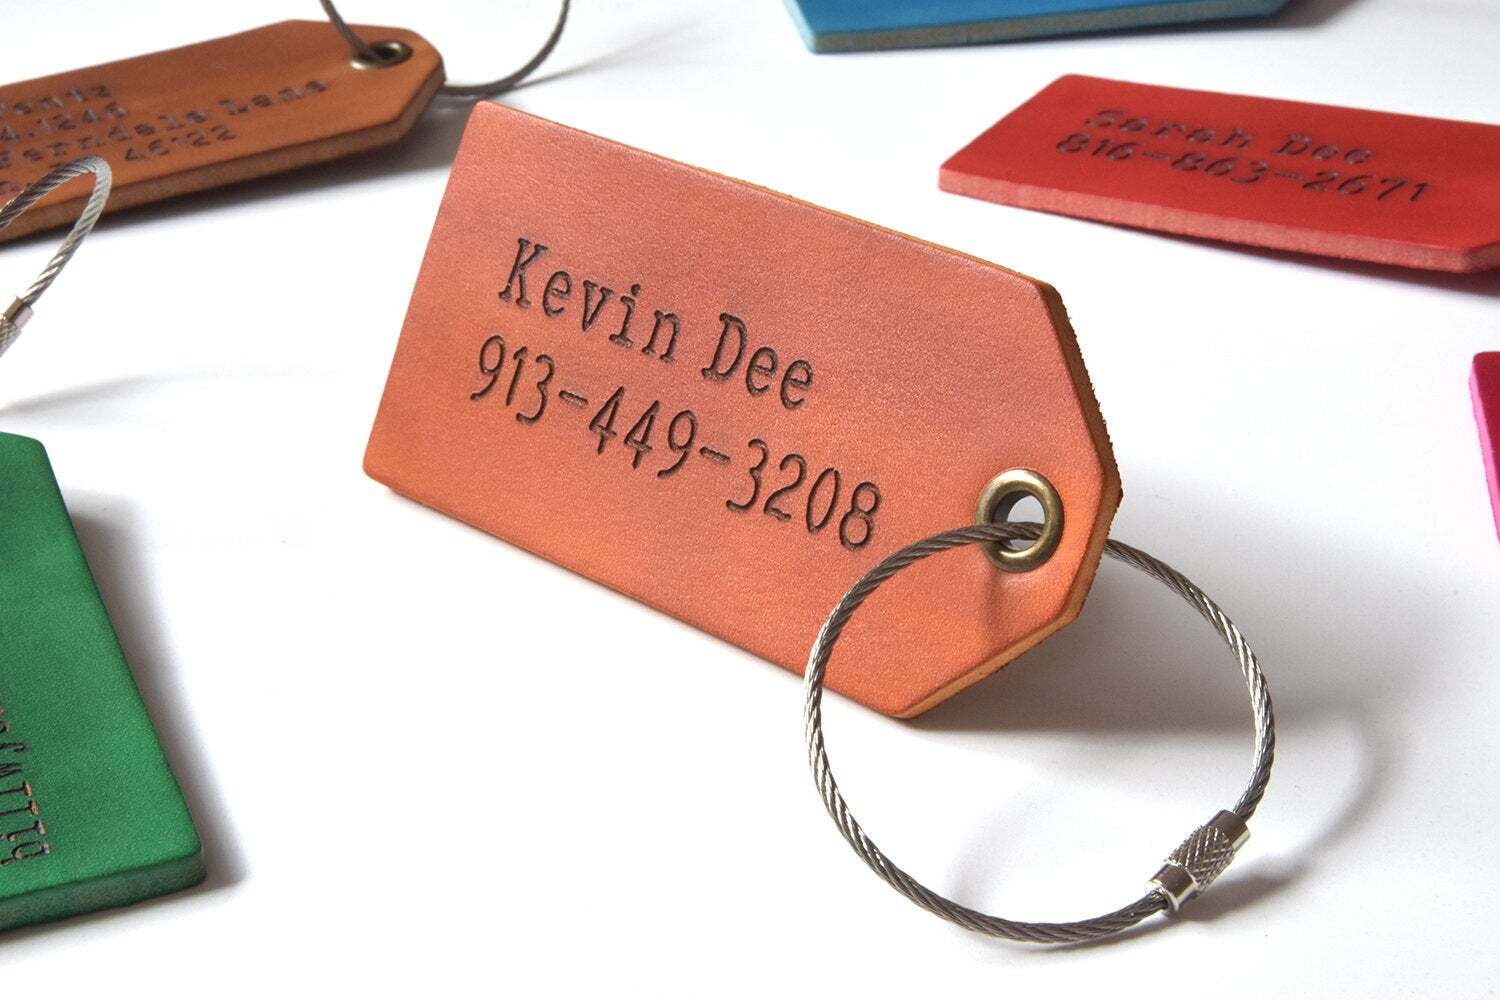 leather luggage tag-1